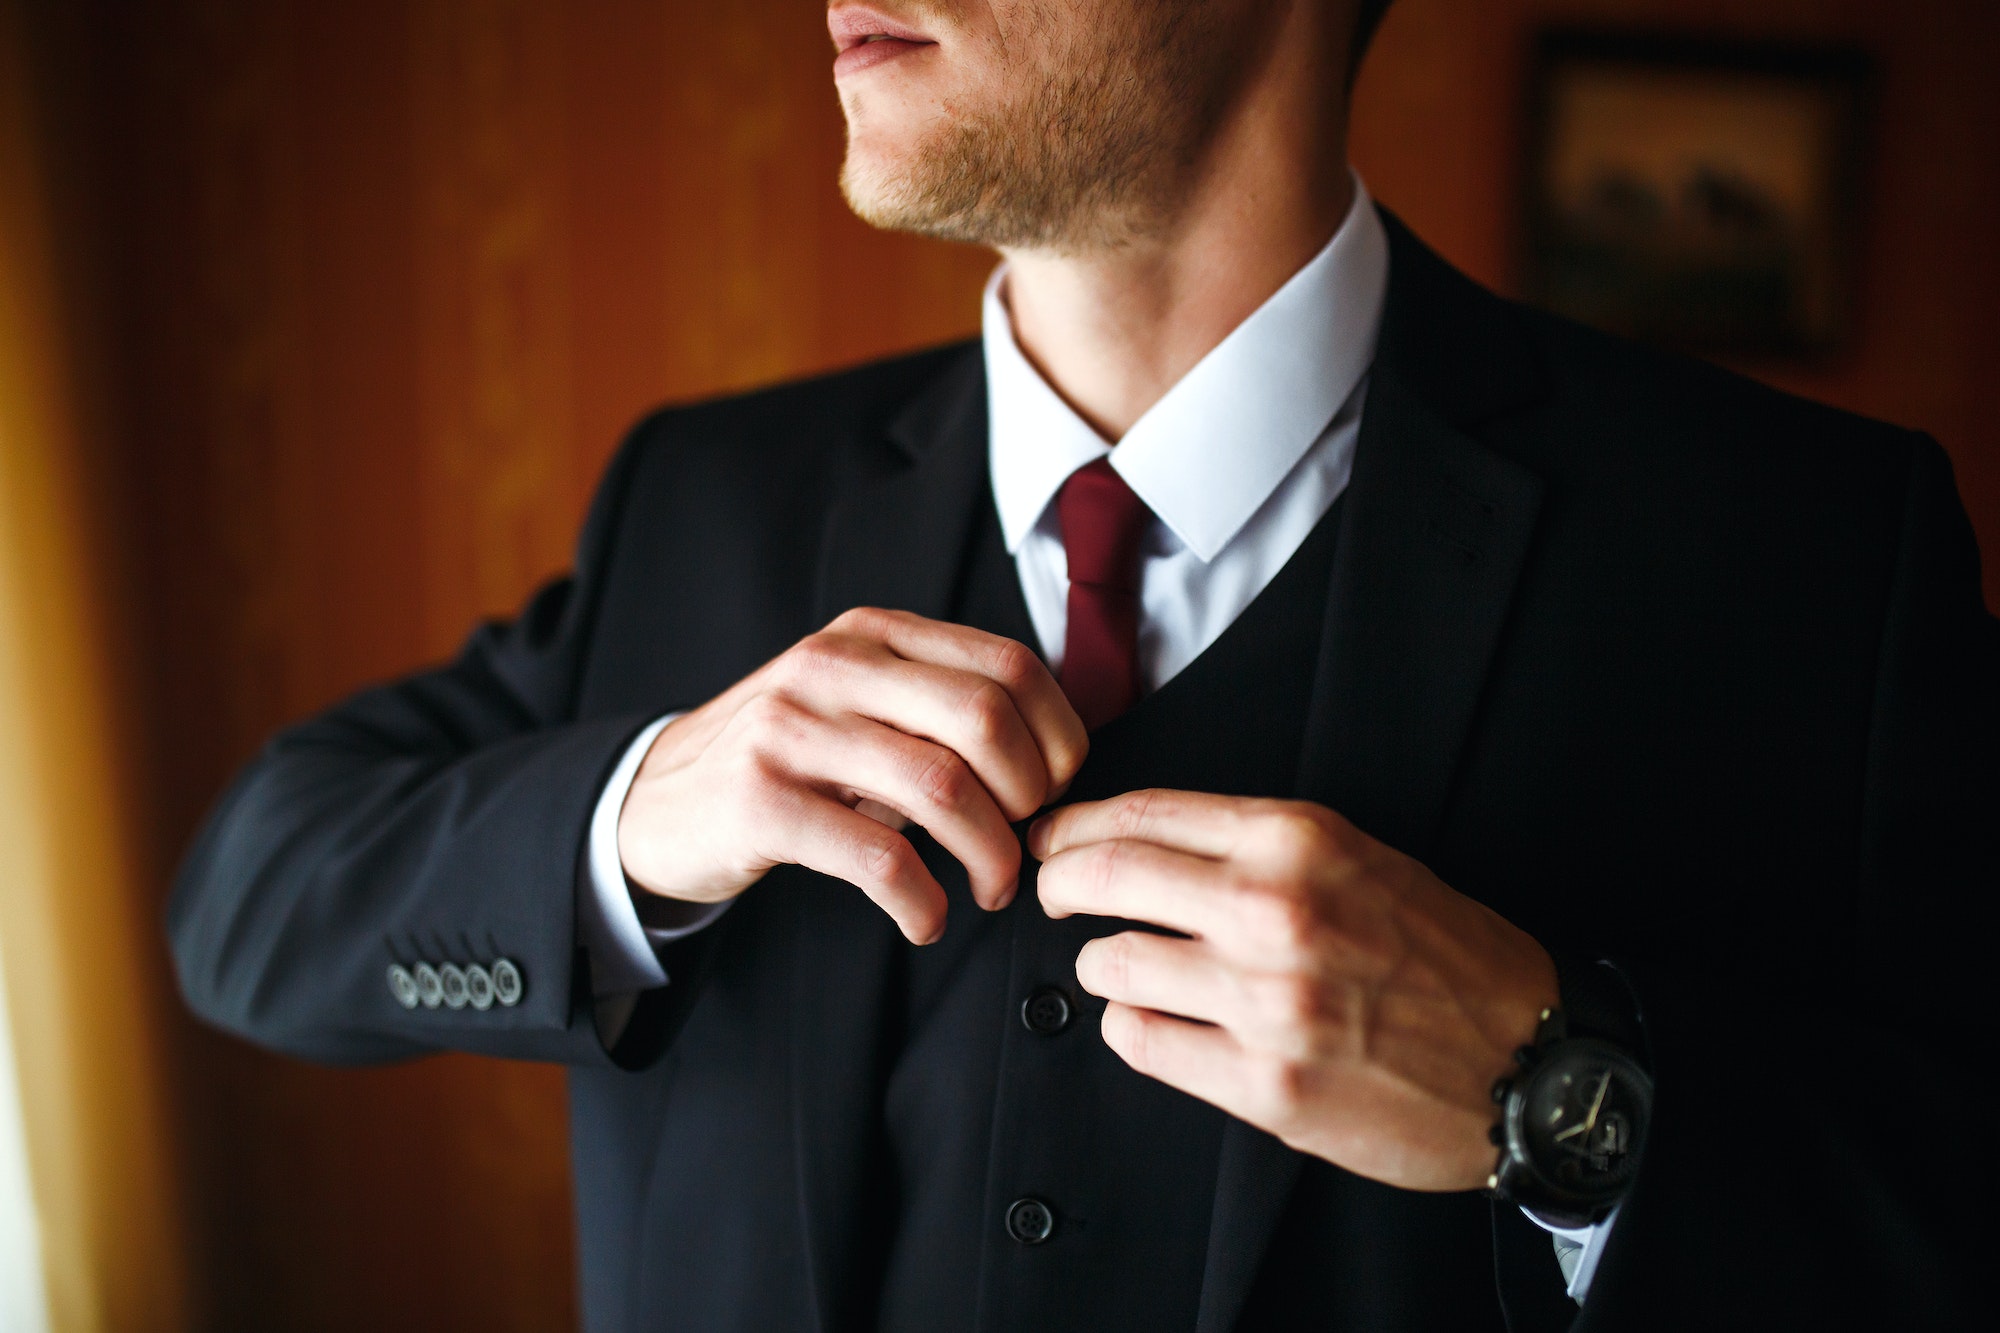 Luxury groom in suit. Businessman. Morning Groom Fees. The beginning of wedding day. Men's fashion.